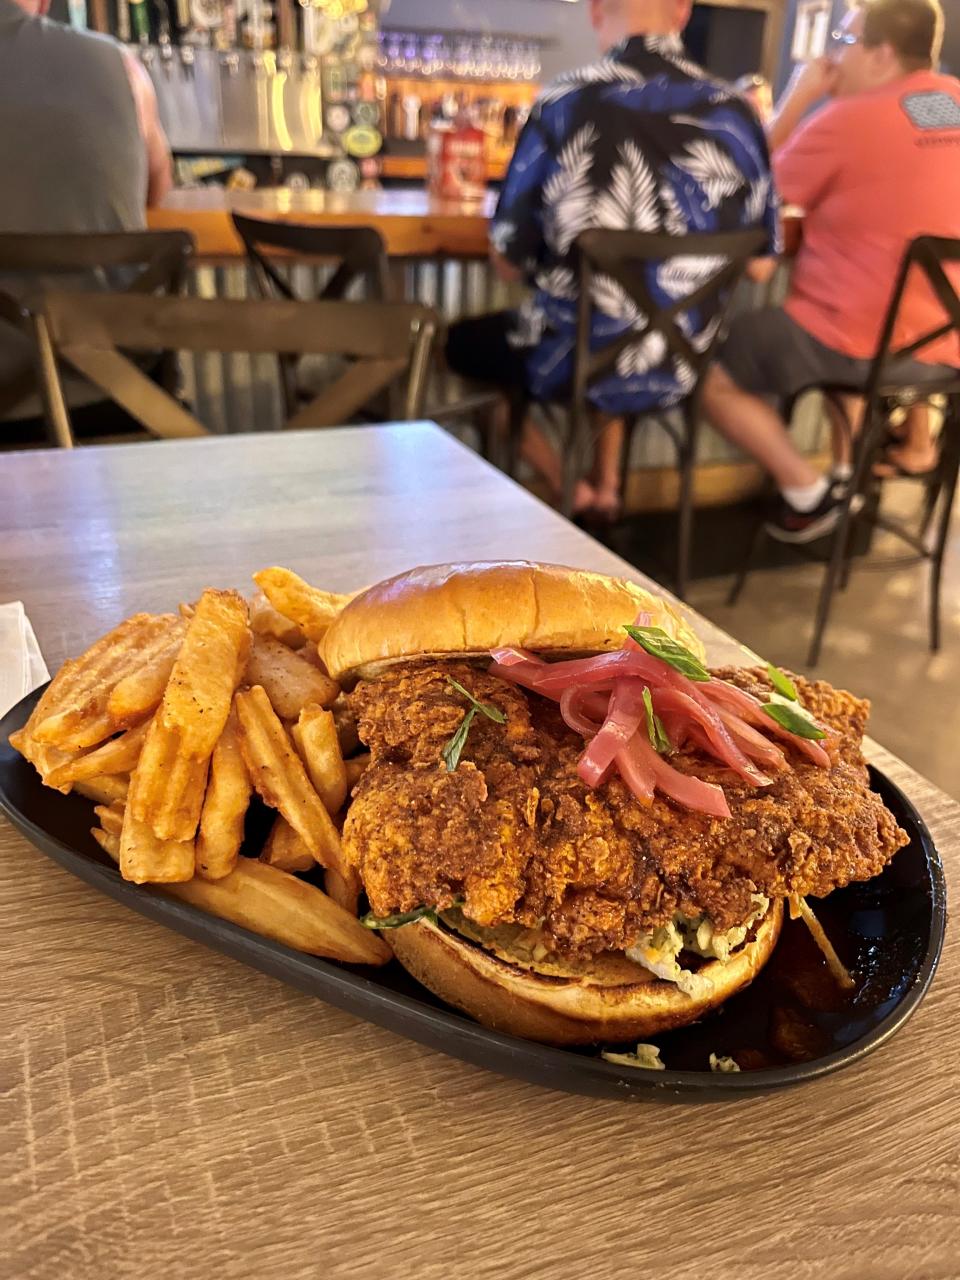 The Nashville hot buttermilk fried chicken sandwich, dubbed the Motha Clucka, is a popular menu item at 10 Twenty Five in Cape Coral.